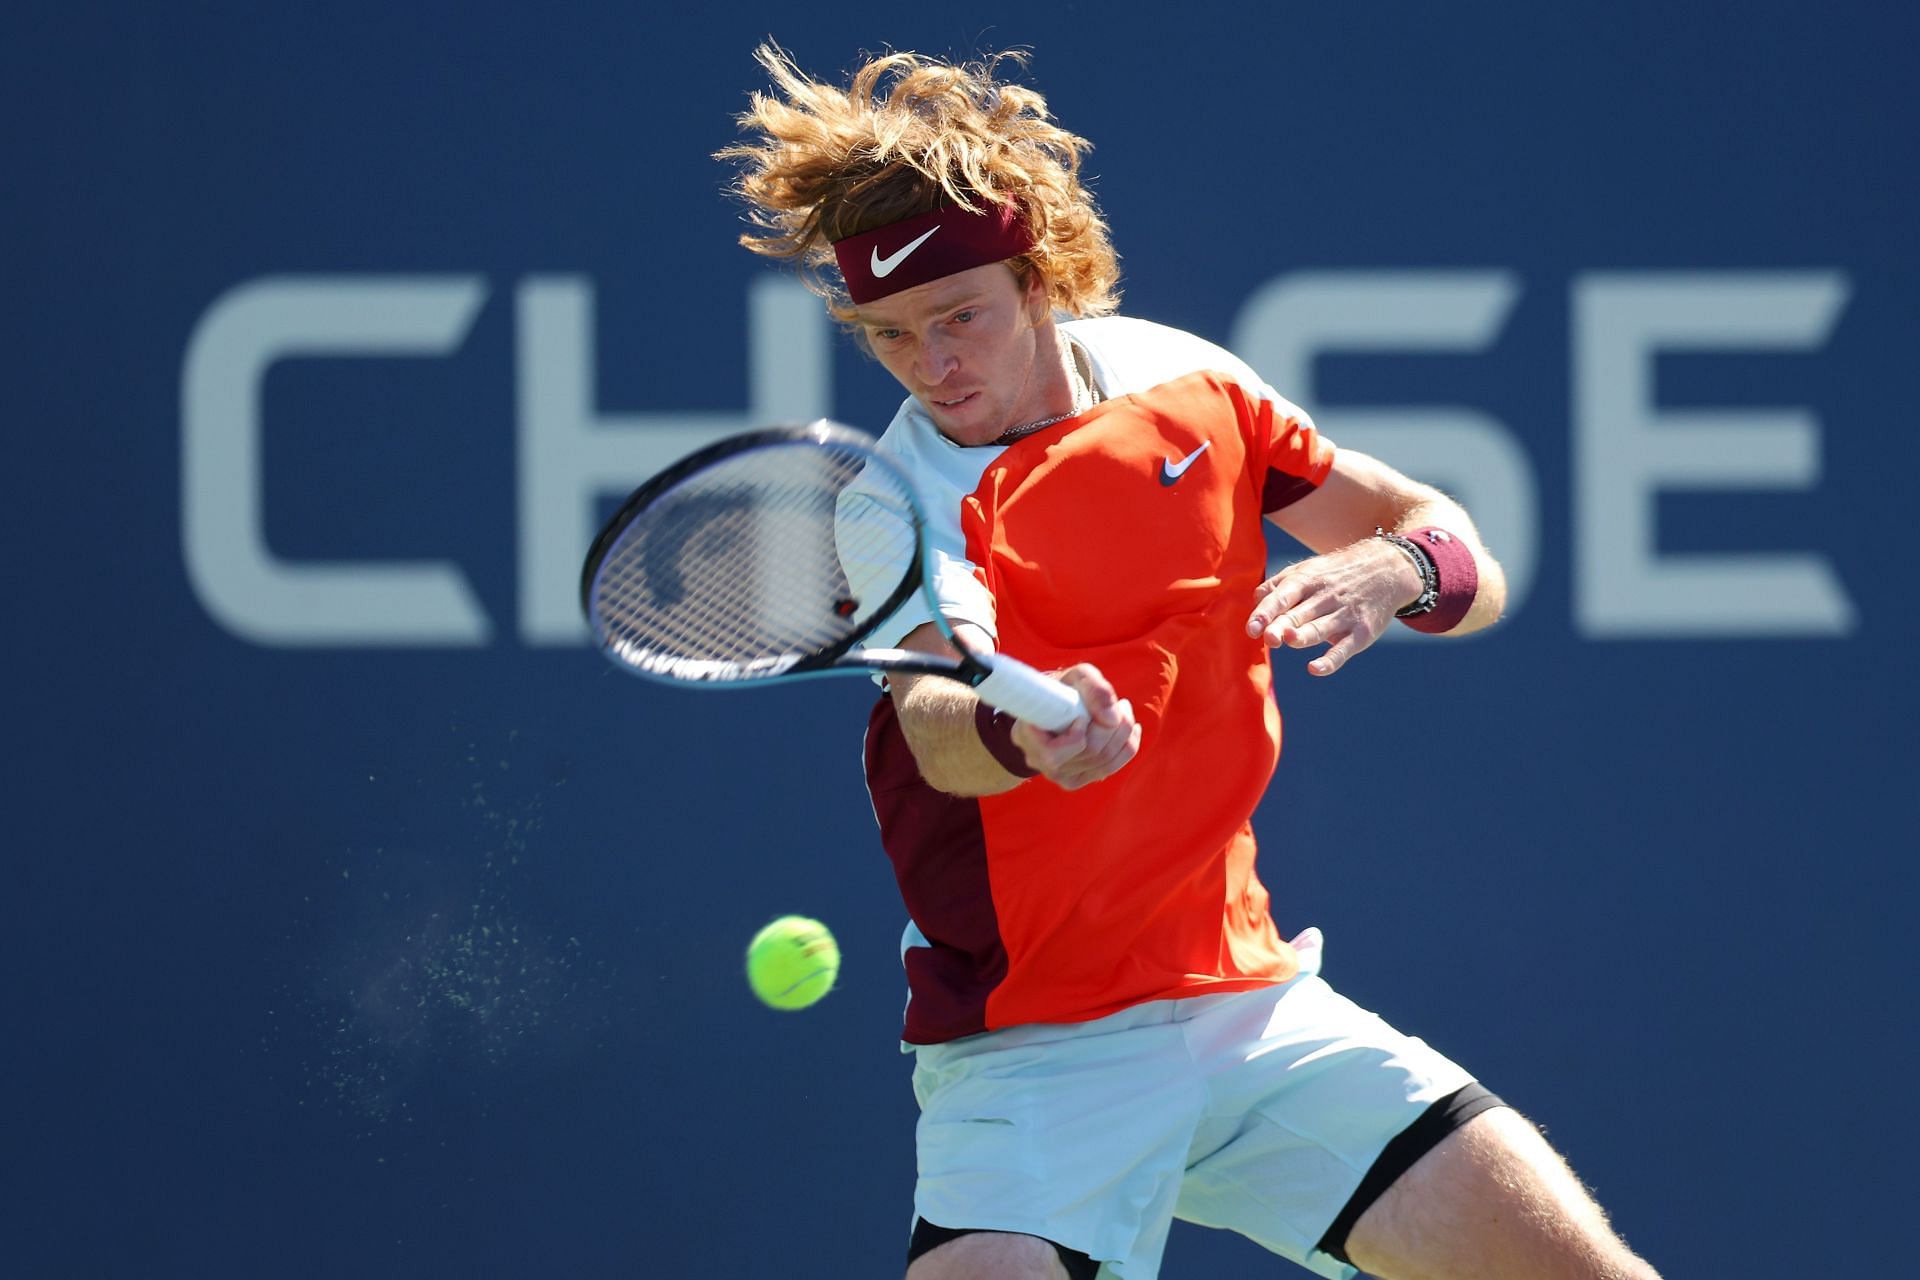 Andrey Rublev plays a forehand against Kwon Soon-woo at the 2022 US Open - Day 4